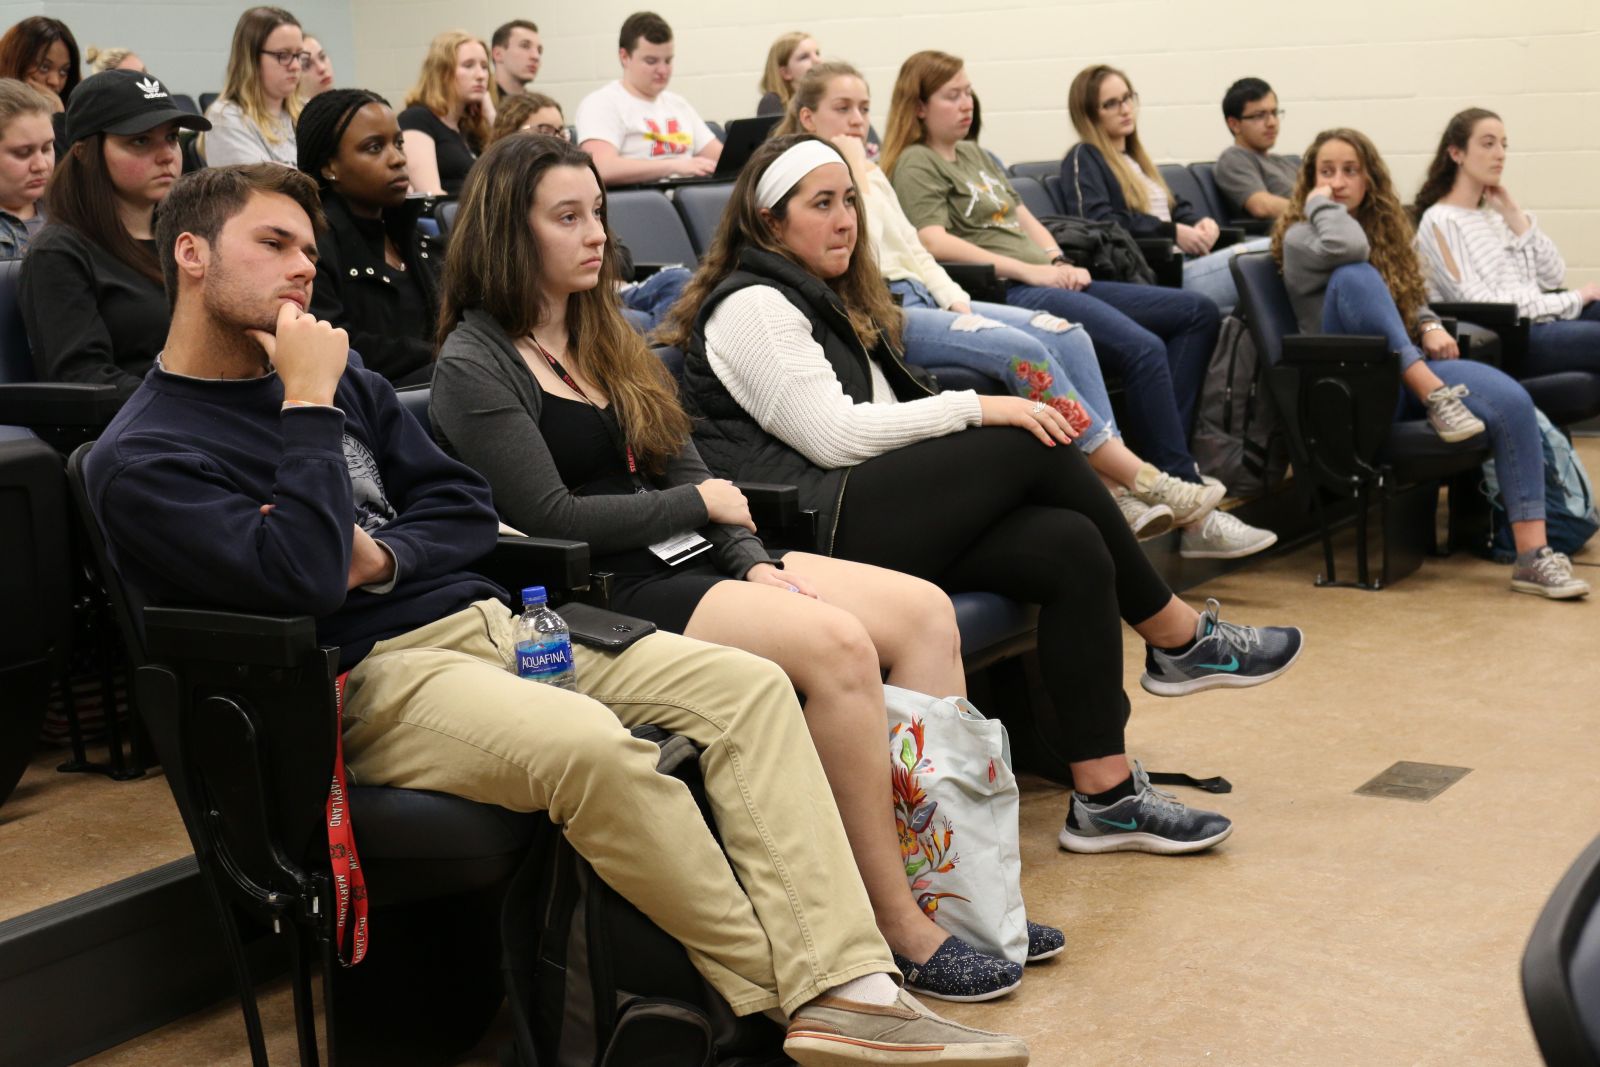 Students attend a lecture at the Universty of Maryland